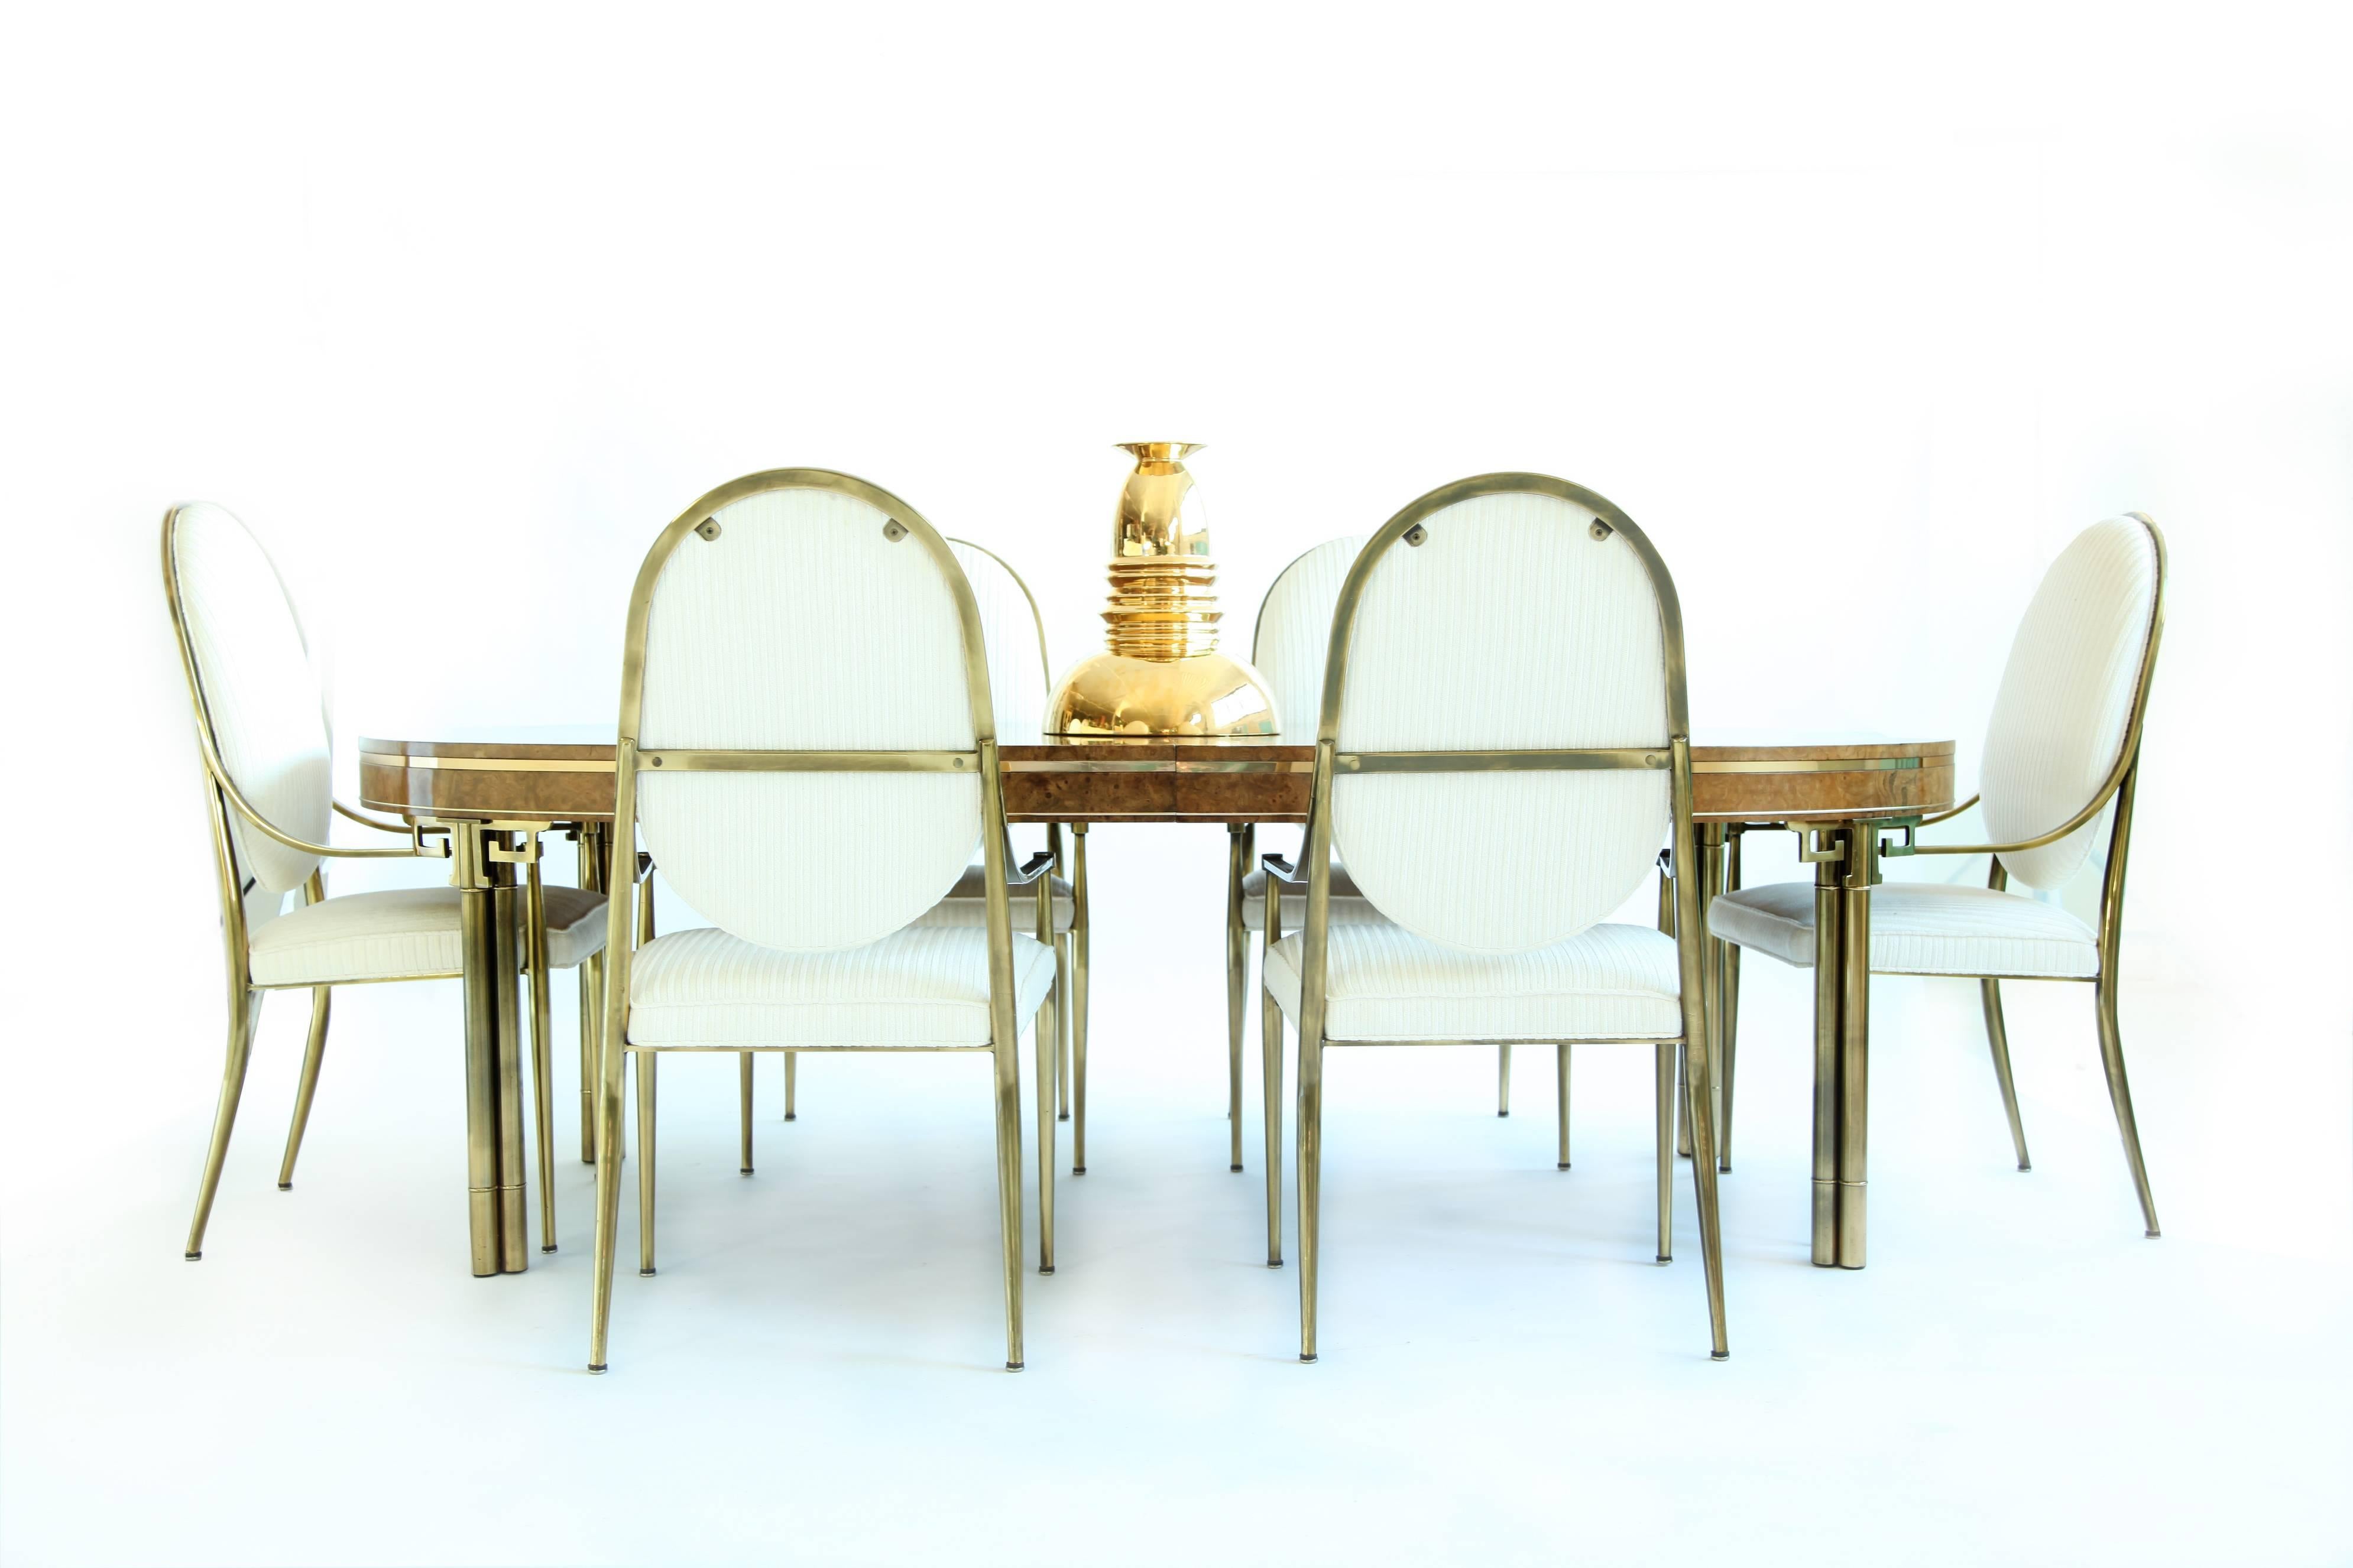 Mastercraft dining table, brass legs with Greek key detail, bookmatched English elm high-polished top inlaid parquetry framing details (shown) and double banded brass trim edge, flat and rounded.
Table dimensions (no leaves) 47